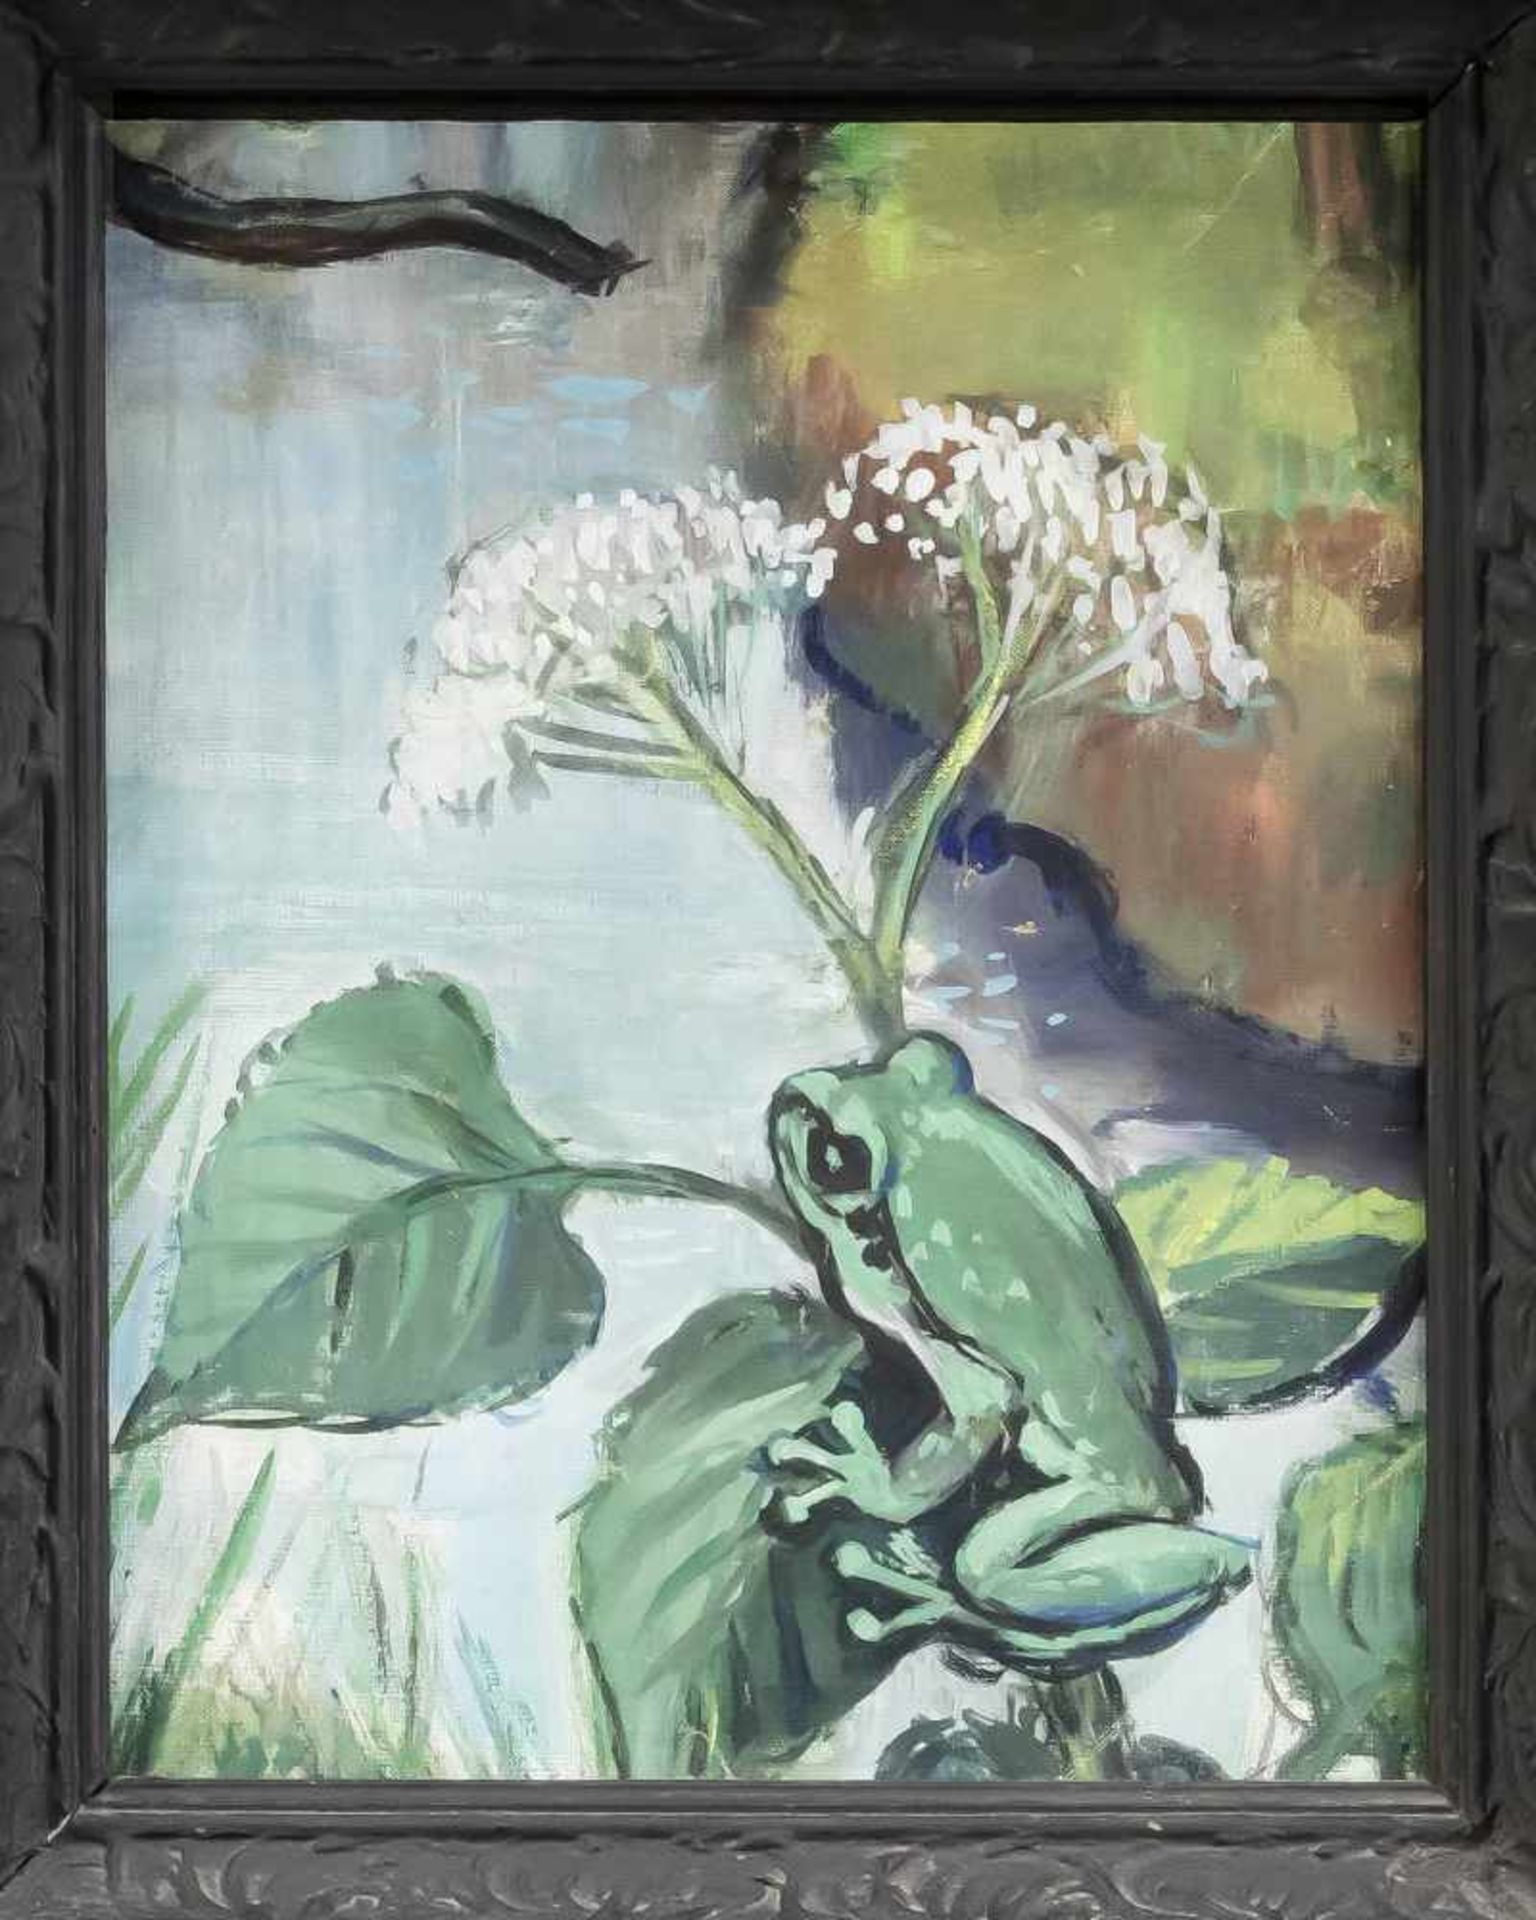 Anonymous Painter in the Mid-20th Century, Frog on a Pond Bank, Acrylic on Canvas,unsigned, possibly